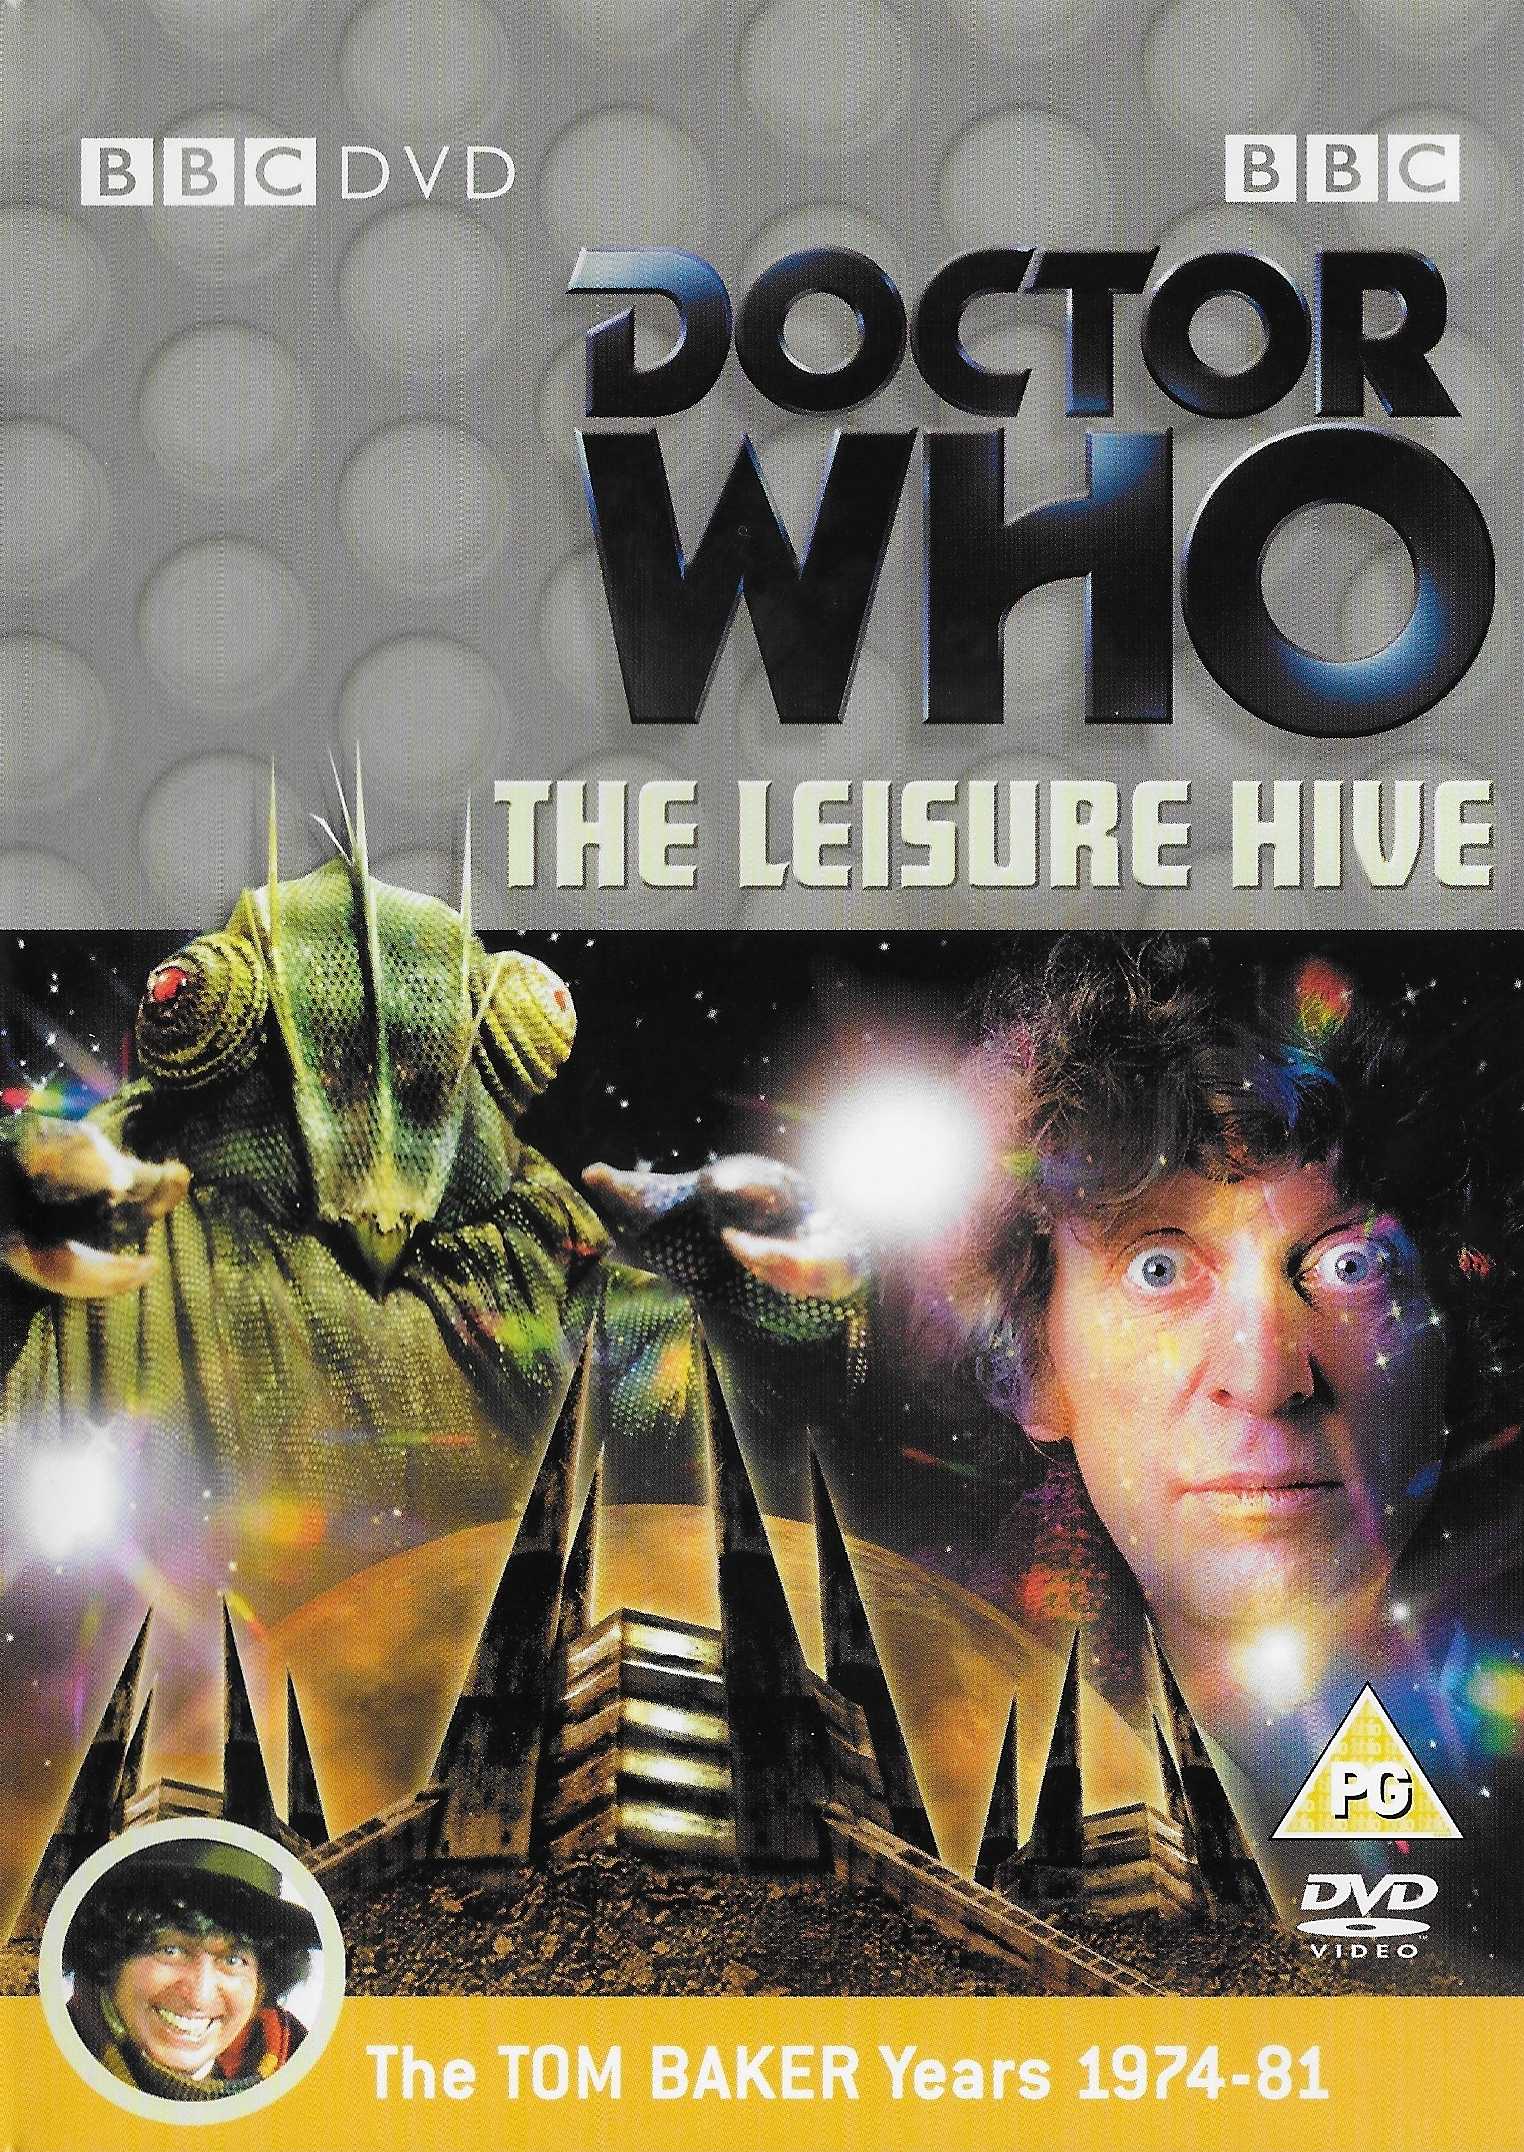 Picture of BBCDVD 1351 Doctor Who - The leisure hive by artist David Fisher from the BBC records and Tapes library